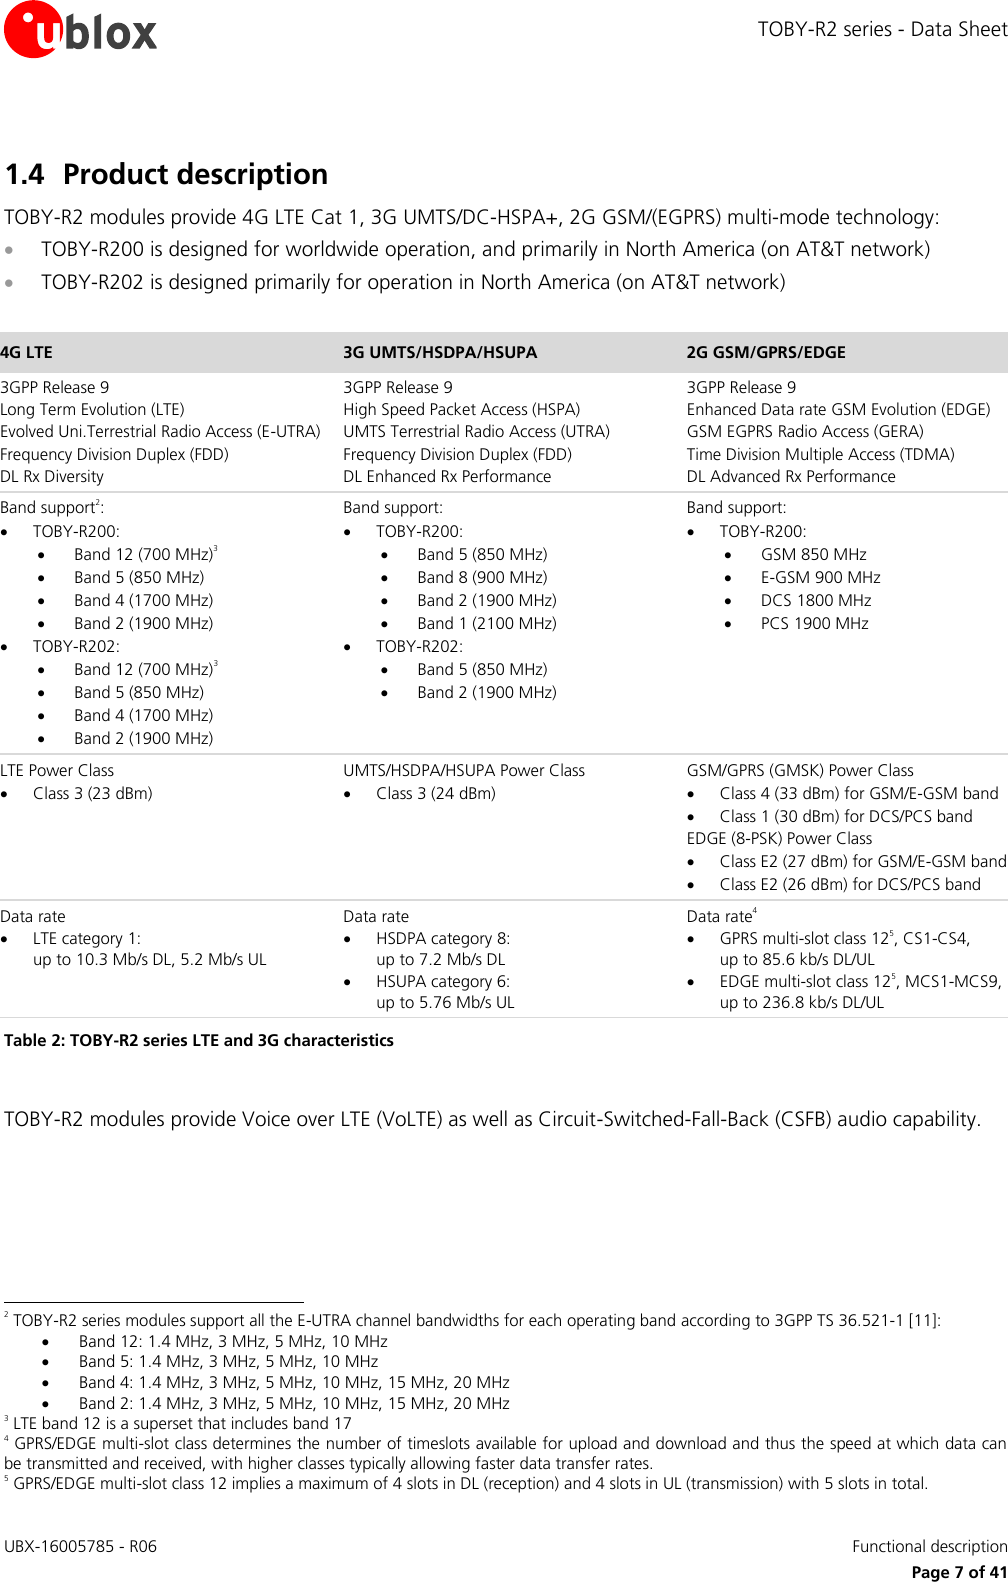 TOBY-R2 series - Data Sheet UBX-16005785 - R06    Functional description   Page 7 of 41 1.4 Product description TOBY-R2 modules provide 4G LTE Cat 1, 3G UMTS/DC-HSPA+, 2G GSM/(EGPRS) multi-mode technology:  TOBY-R200 is designed for worldwide operation, and primarily in North America (on AT&amp;T network)   TOBY-R202 is designed primarily for operation in North America (on AT&amp;T network)  4G LTE 3G UMTS/HSDPA/HSUPA 2G GSM/GPRS/EDGE 3GPP Release 9 Long Term Evolution (LTE) Evolved Uni.Terrestrial Radio Access (E-UTRA) Frequency Division Duplex (FDD) DL Rx Diversity 3GPP Release 9 High Speed Packet Access (HSPA) UMTS Terrestrial Radio Access (UTRA)  Frequency Division Duplex (FDD) DL Enhanced Rx Performance  3GPP Release 9 Enhanced Data rate GSM Evolution (EDGE) GSM EGPRS Radio Access (GERA) Time Division Multiple Access (TDMA) DL Advanced Rx Performance  Band support2:  TOBY-R200:  Band 12 (700 MHz)3  Band 5 (850 MHz)  Band 4 (1700 MHz)  Band 2 (1900 MHz)  TOBY-R202:  Band 12 (700 MHz)3  Band 5 (850 MHz)  Band 4 (1700 MHz)  Band 2 (1900 MHz) Band support:  TOBY-R200:  Band 5 (850 MHz)  Band 8 (900 MHz)  Band 2 (1900 MHz)  Band 1 (2100 MHz)  TOBY-R202:  Band 5 (850 MHz)  Band 2 (1900 MHz)  Band support:  TOBY-R200:  GSM 850 MHz  E-GSM 900 MHz  DCS 1800 MHz  PCS 1900 MHz  LTE Power Class  Class 3 (23 dBm) UMTS/HSDPA/HSUPA Power Class  Class 3 (24 dBm) GSM/GPRS (GMSK) Power Class  Class 4 (33 dBm) for GSM/E-GSM band  Class 1 (30 dBm) for DCS/PCS band EDGE (8-PSK) Power Class  Class E2 (27 dBm) for GSM/E-GSM band  Class E2 (26 dBm) for DCS/PCS band Data rate  LTE category 1:  up to 10.3 Mb/s DL, 5.2 Mb/s UL  Data rate  HSDPA category 8: up to 7.2 Mb/s DL  HSUPA category 6:  up to 5.76 Mb/s UL Data rate4  GPRS multi-slot class 125, CS1-CS4,  up to 85.6 kb/s DL/UL   EDGE multi-slot class 125, MCS1-MCS9, up to 236.8 kb/s DL/UL  Table 2: TOBY-R2 series LTE and 3G characteristics  TOBY-R2 modules provide Voice over LTE (VoLTE) as well as Circuit-Switched-Fall-Back (CSFB) audio capability.                                                        2 TOBY-R2 series modules support all the E-UTRA channel bandwidths for each operating band according to 3GPP TS 36.521-1 [11]:   Band 12: 1.4 MHz, 3 MHz, 5 MHz, 10 MHz  Band 5: 1.4 MHz, 3 MHz, 5 MHz, 10 MHz  Band 4: 1.4 MHz, 3 MHz, 5 MHz, 10 MHz, 15 MHz, 20 MHz  Band 2: 1.4 MHz, 3 MHz, 5 MHz, 10 MHz, 15 MHz, 20 MHz 3 LTE band 12 is a superset that includes band 17 4 GPRS/EDGE multi-slot class determines the number of timeslots available for upload and download and thus the speed at which data can be transmitted and received, with higher classes typically allowing faster data transfer rates. 5 GPRS/EDGE multi-slot class 12 implies a maximum of 4 slots in DL (reception) and 4 slots in UL (transmission) with 5 slots in total. 